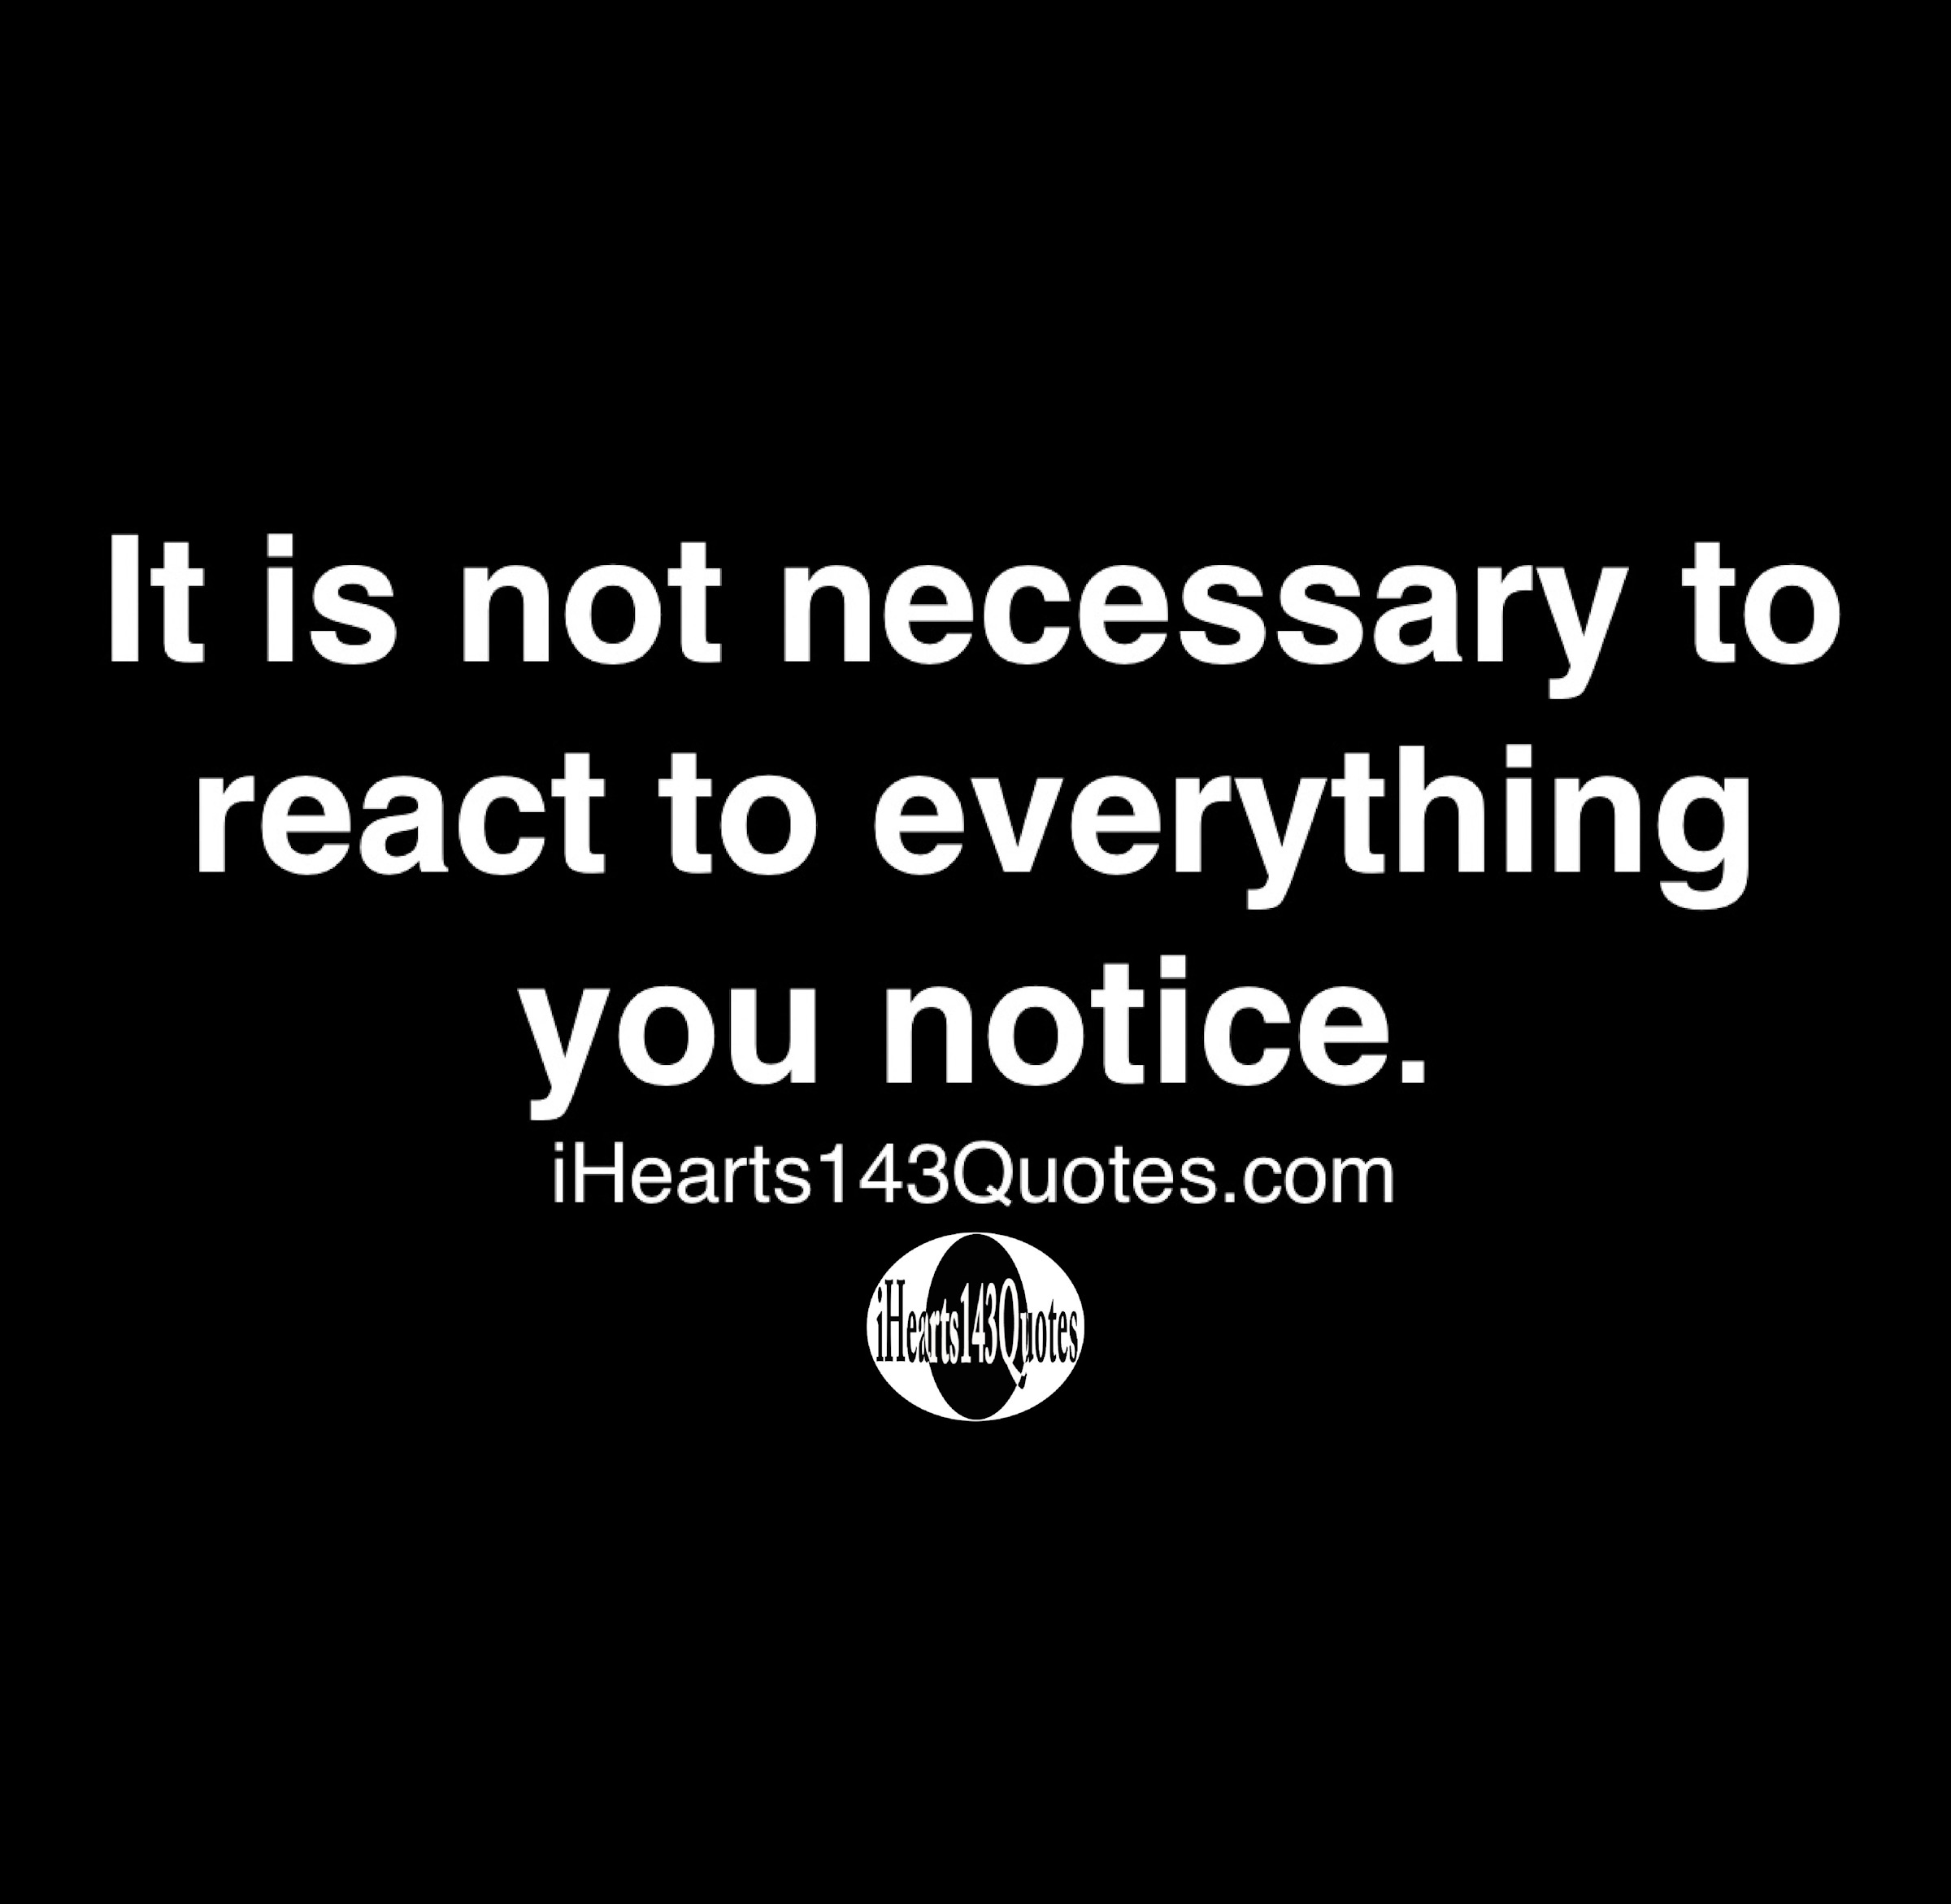 It is not necessary to react to everything you notice -Quotes